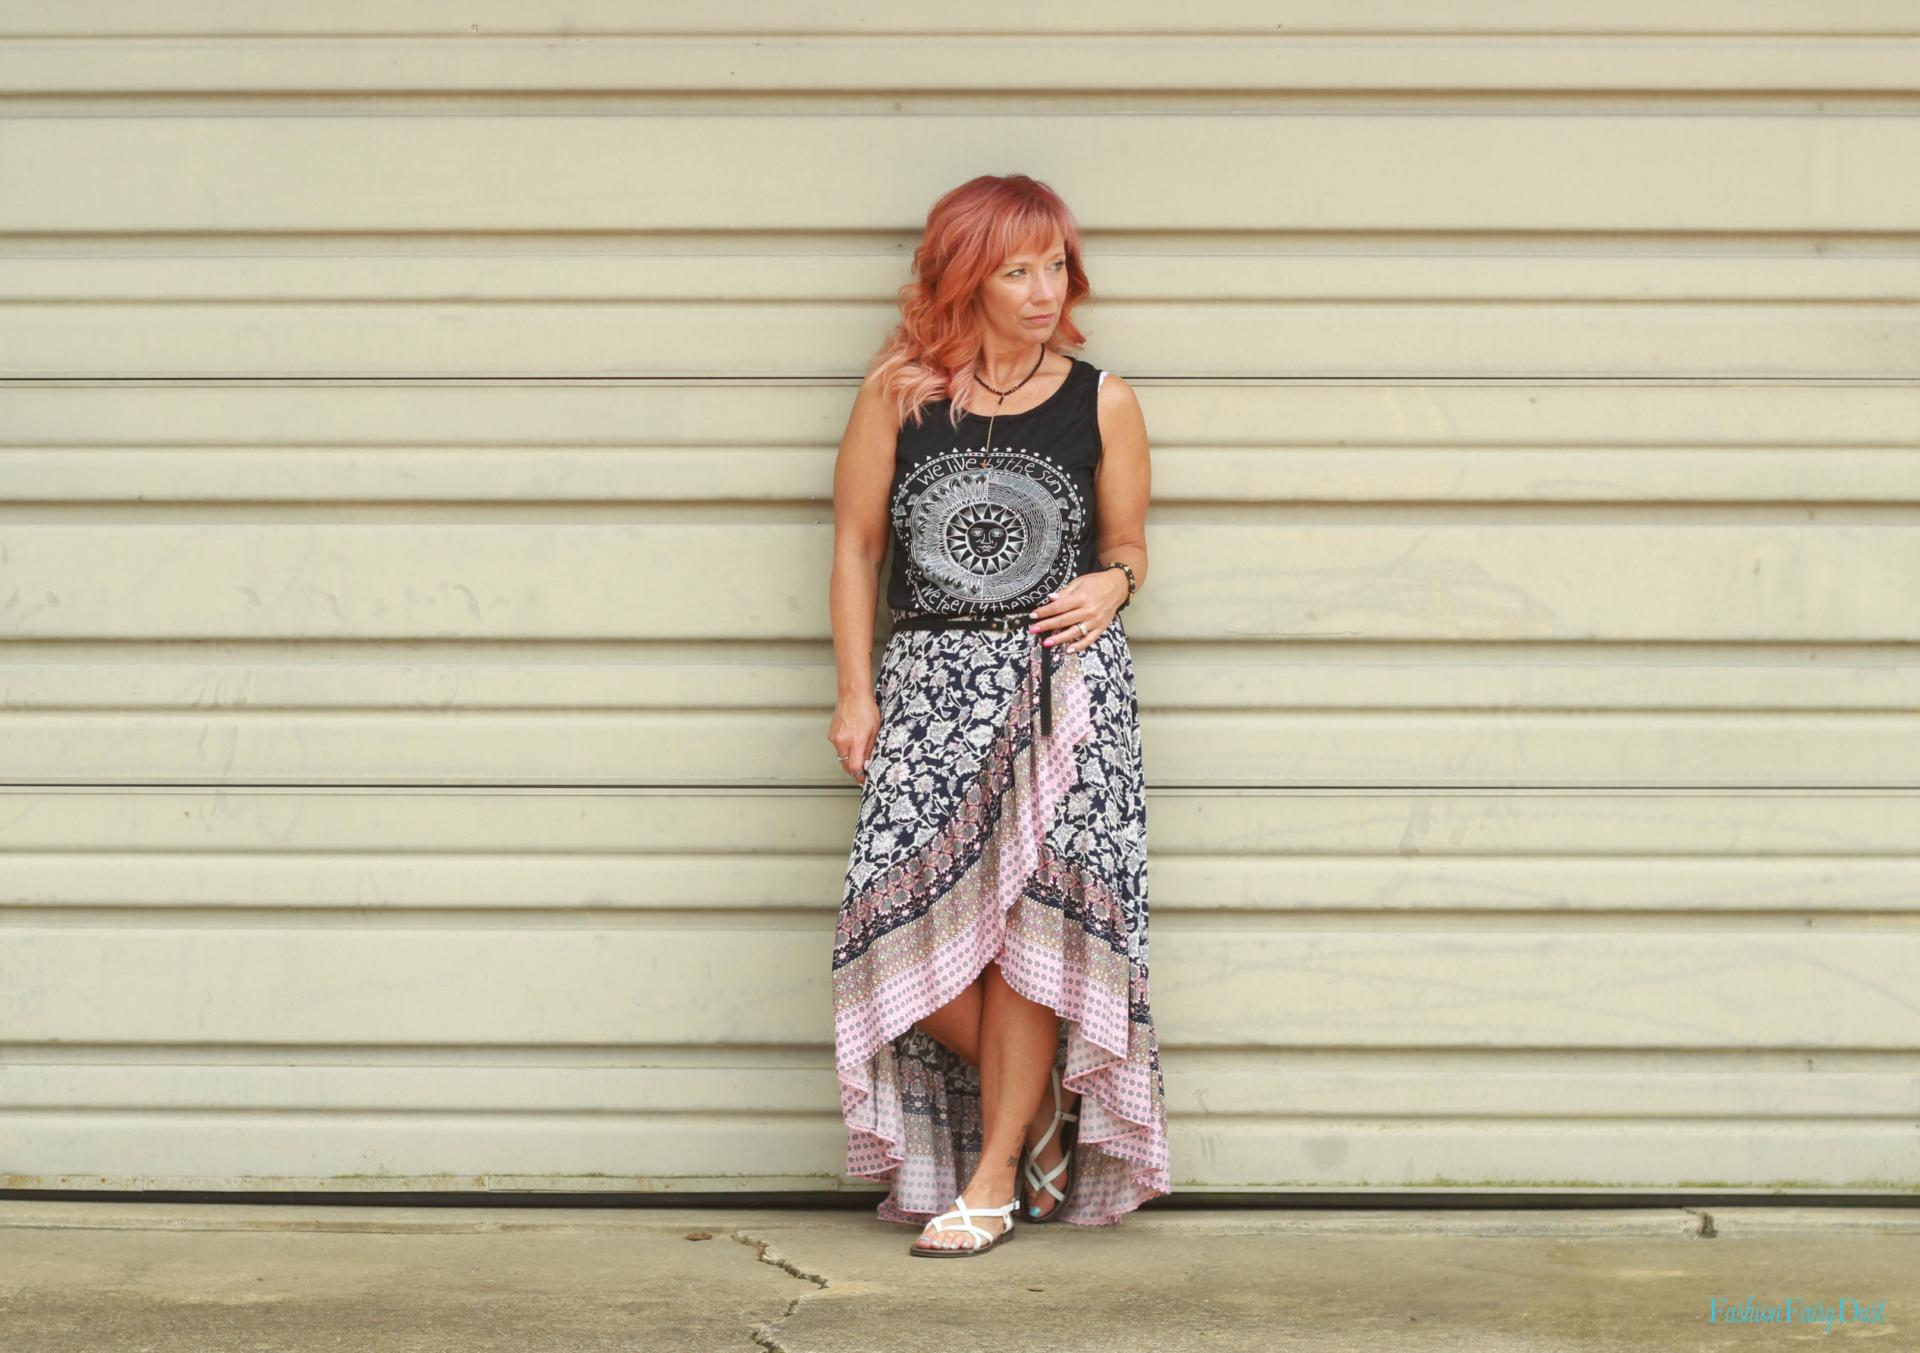 Ruffled skirt, moon graphic tank and sandals.